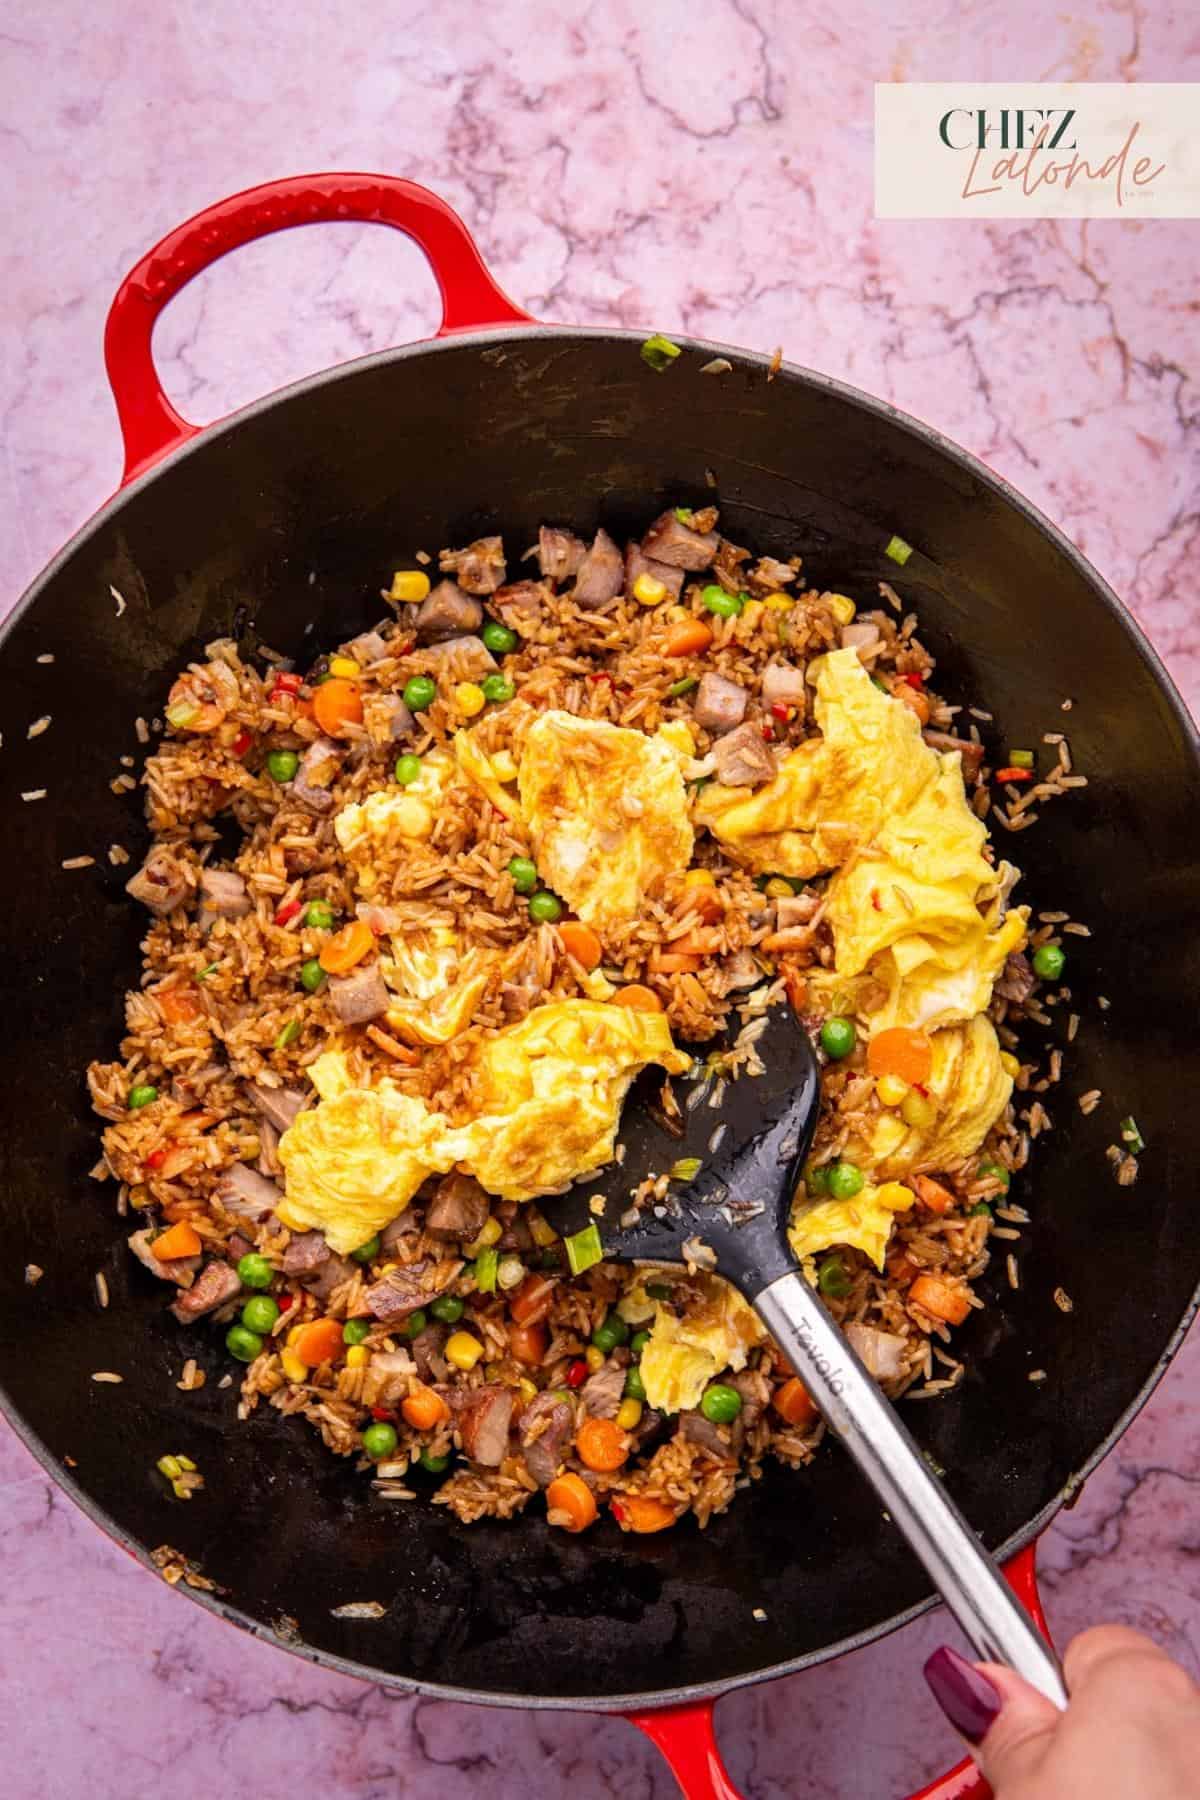 Use your spatula to break apart the eggs and stir-fry the mixture for 1 to 2 more minutes.